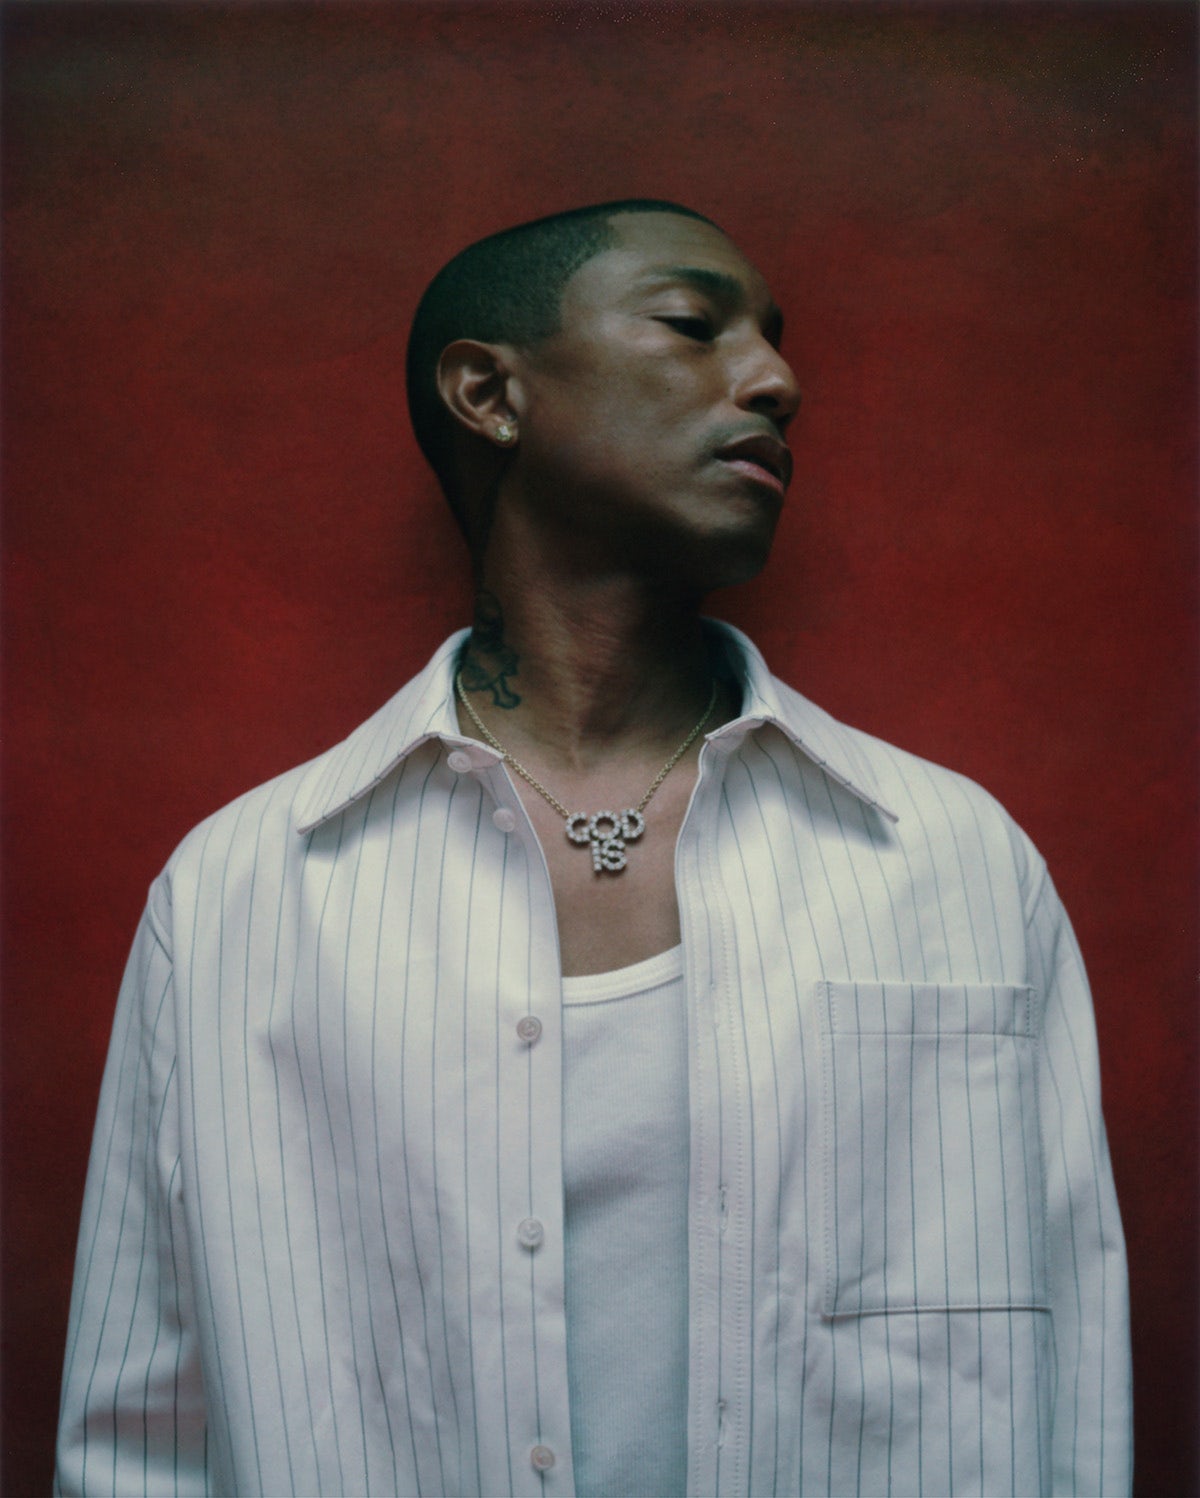 Portrait of Pharrell by Gabriel Moses against a red backdrop